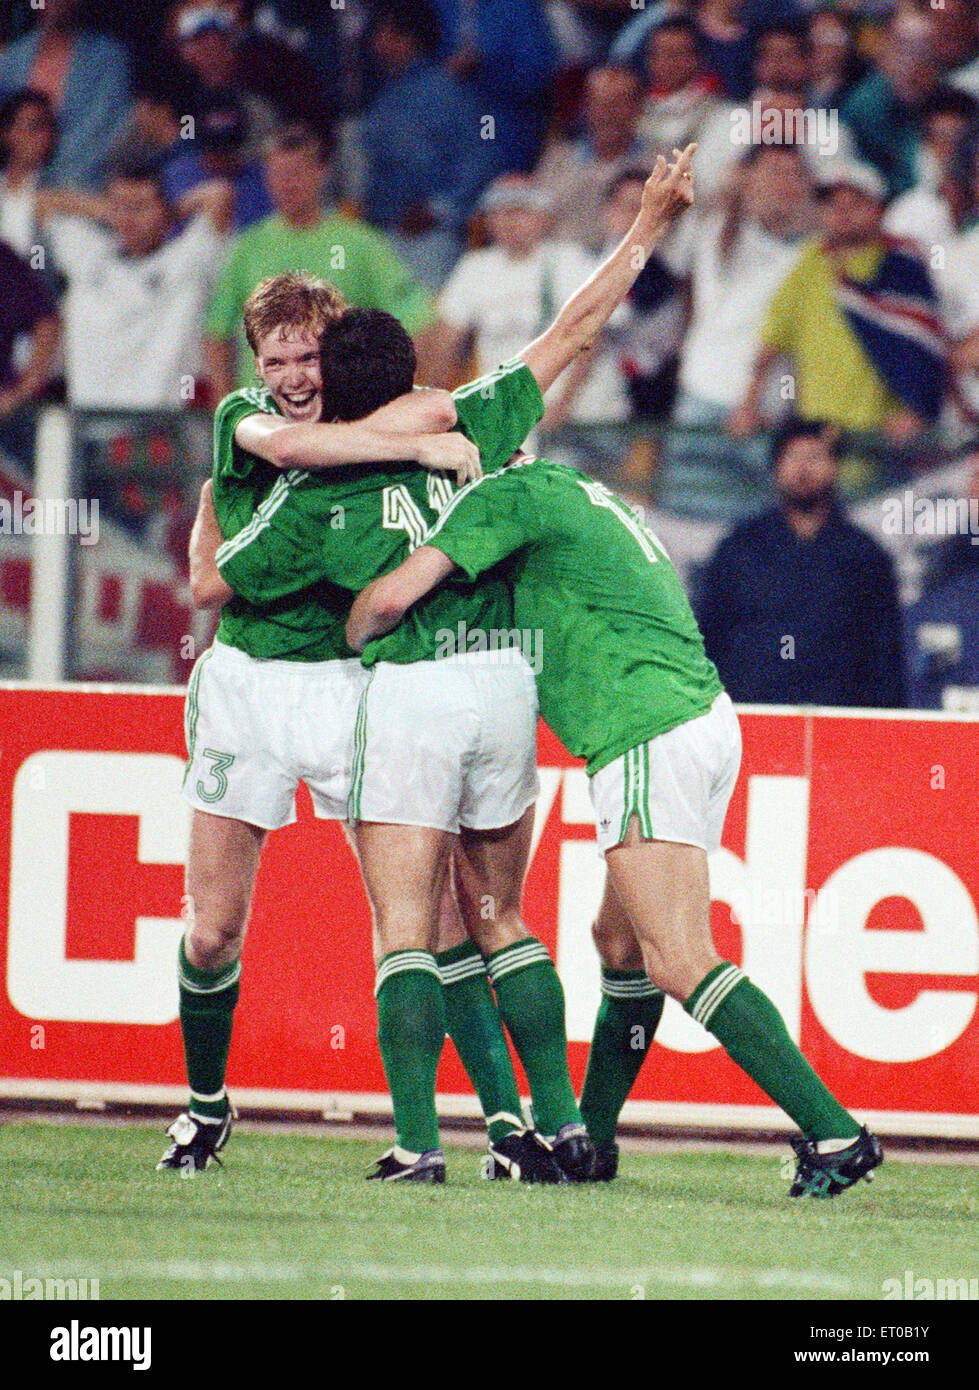 World Cup Group F match at the Stadio Sant'Elia in Cagliari, Italy. England 1 v Republic of Ireland 1. Kevin Sheedy is congratulated by teammates Steve Staunton and ndy Townsend after scoring the equalising goal. 11th June 1990. Stock Photo